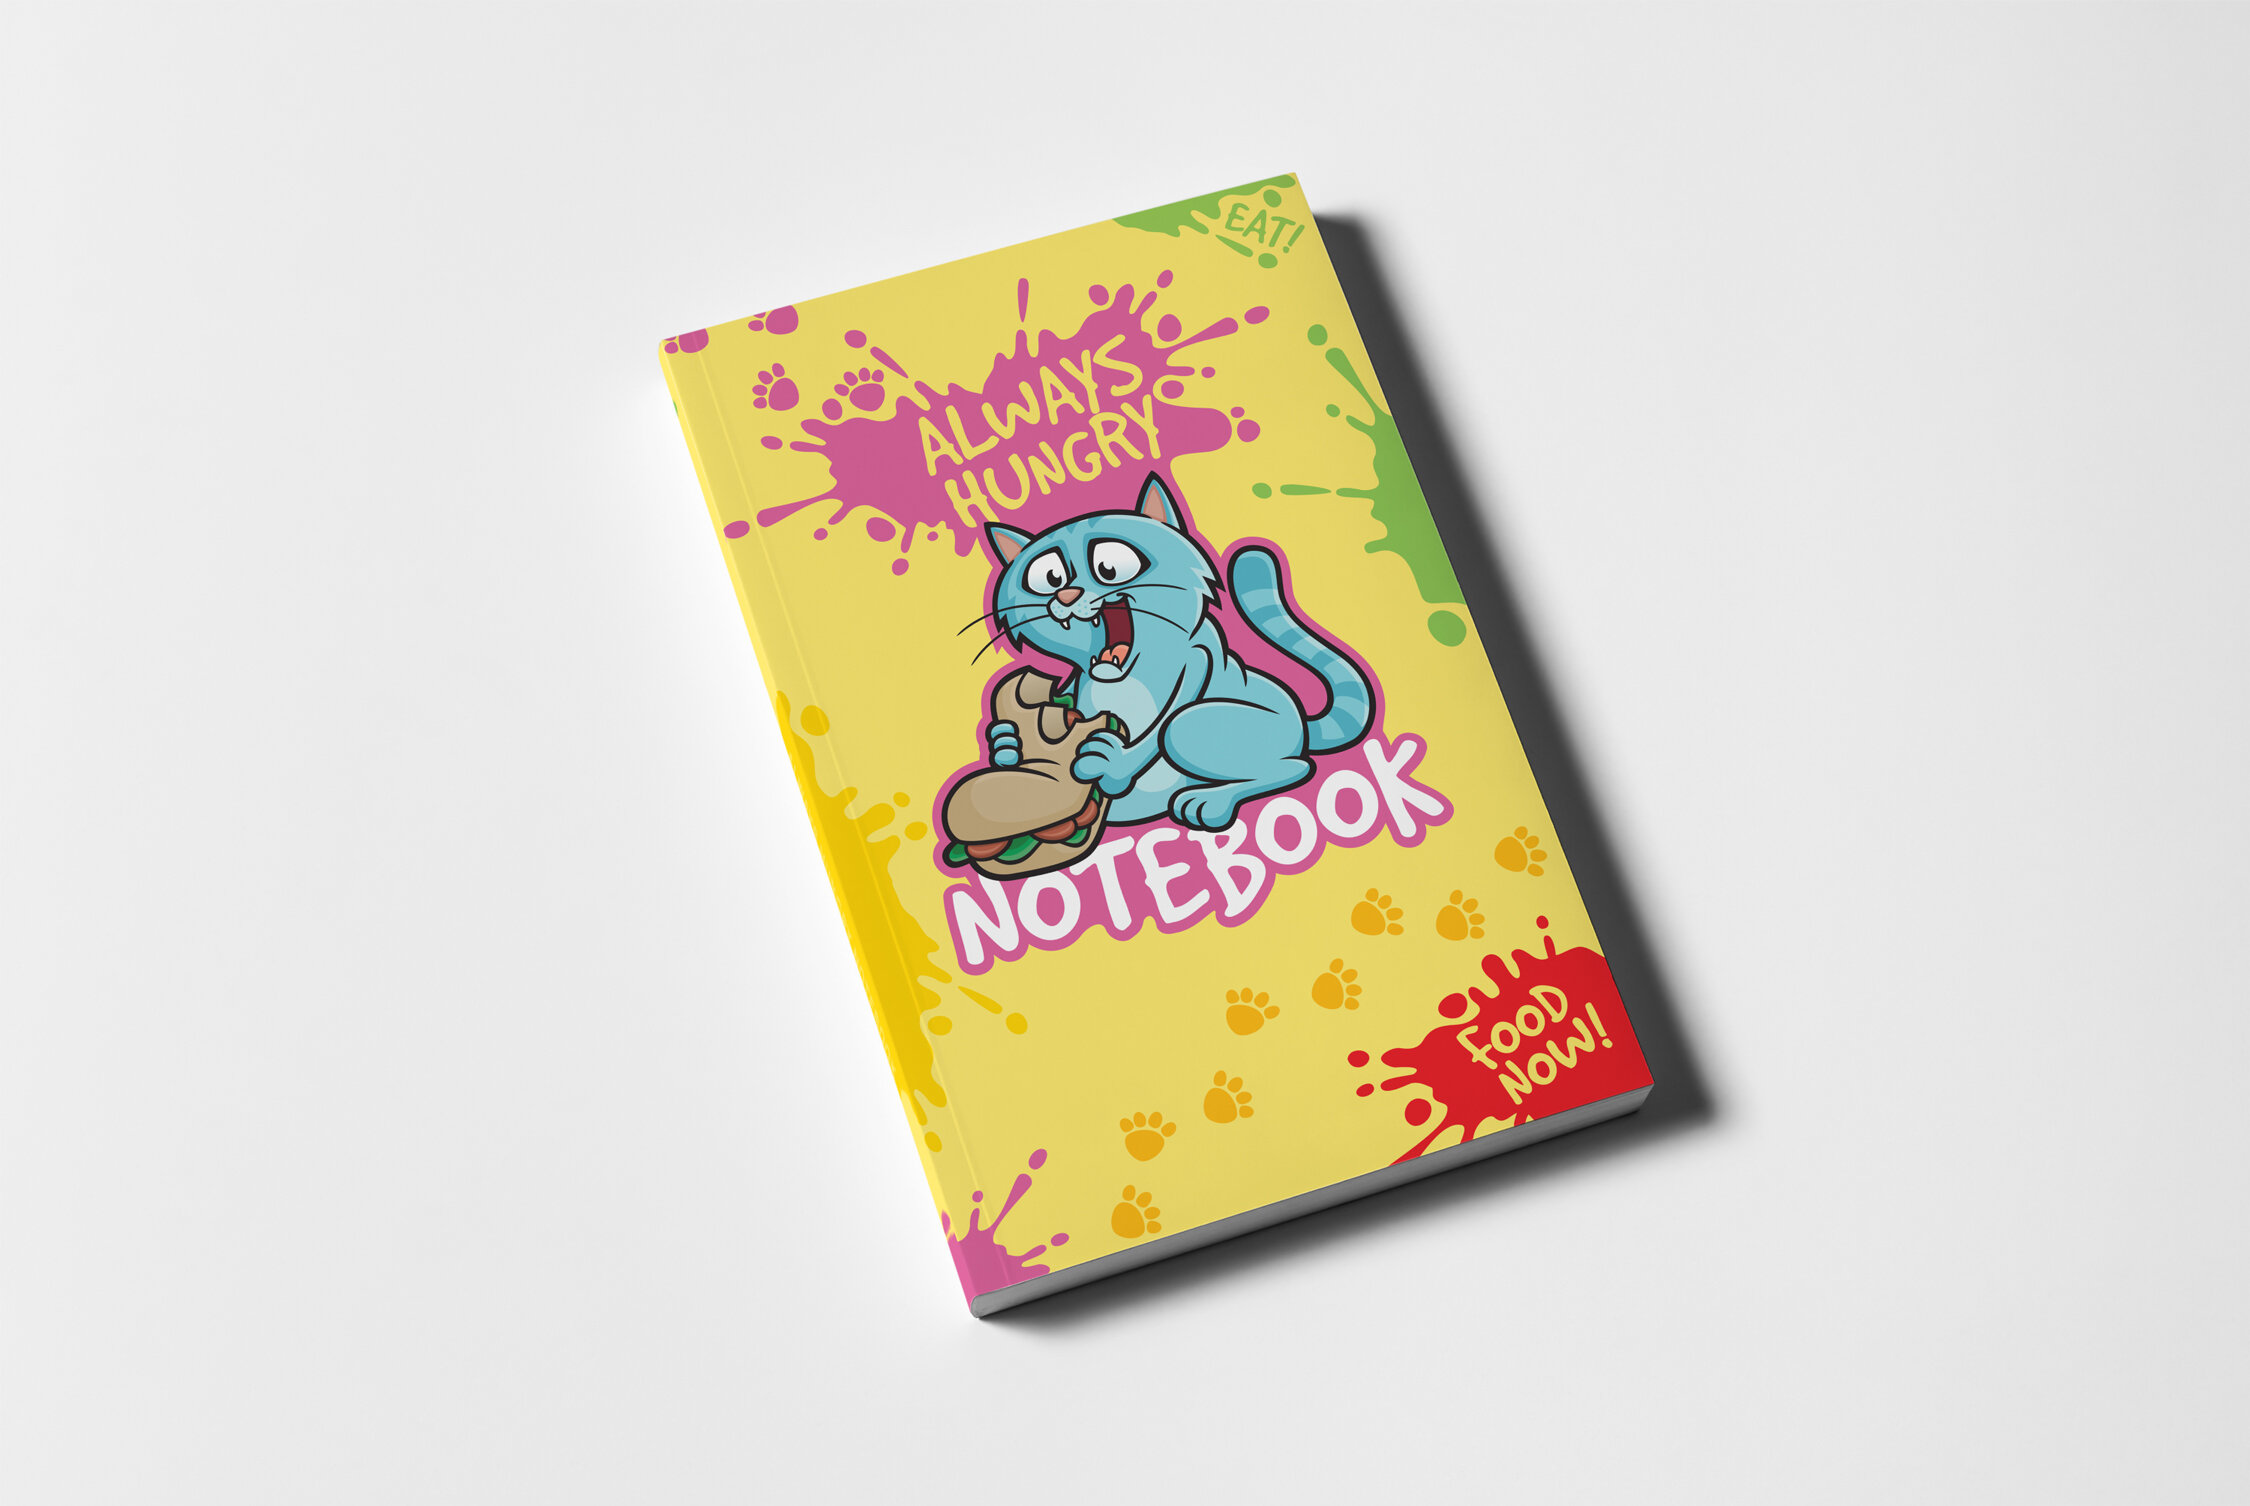 6x9-CatAlwaysHungry-Notebook-Mockup-Cover-01.jpg